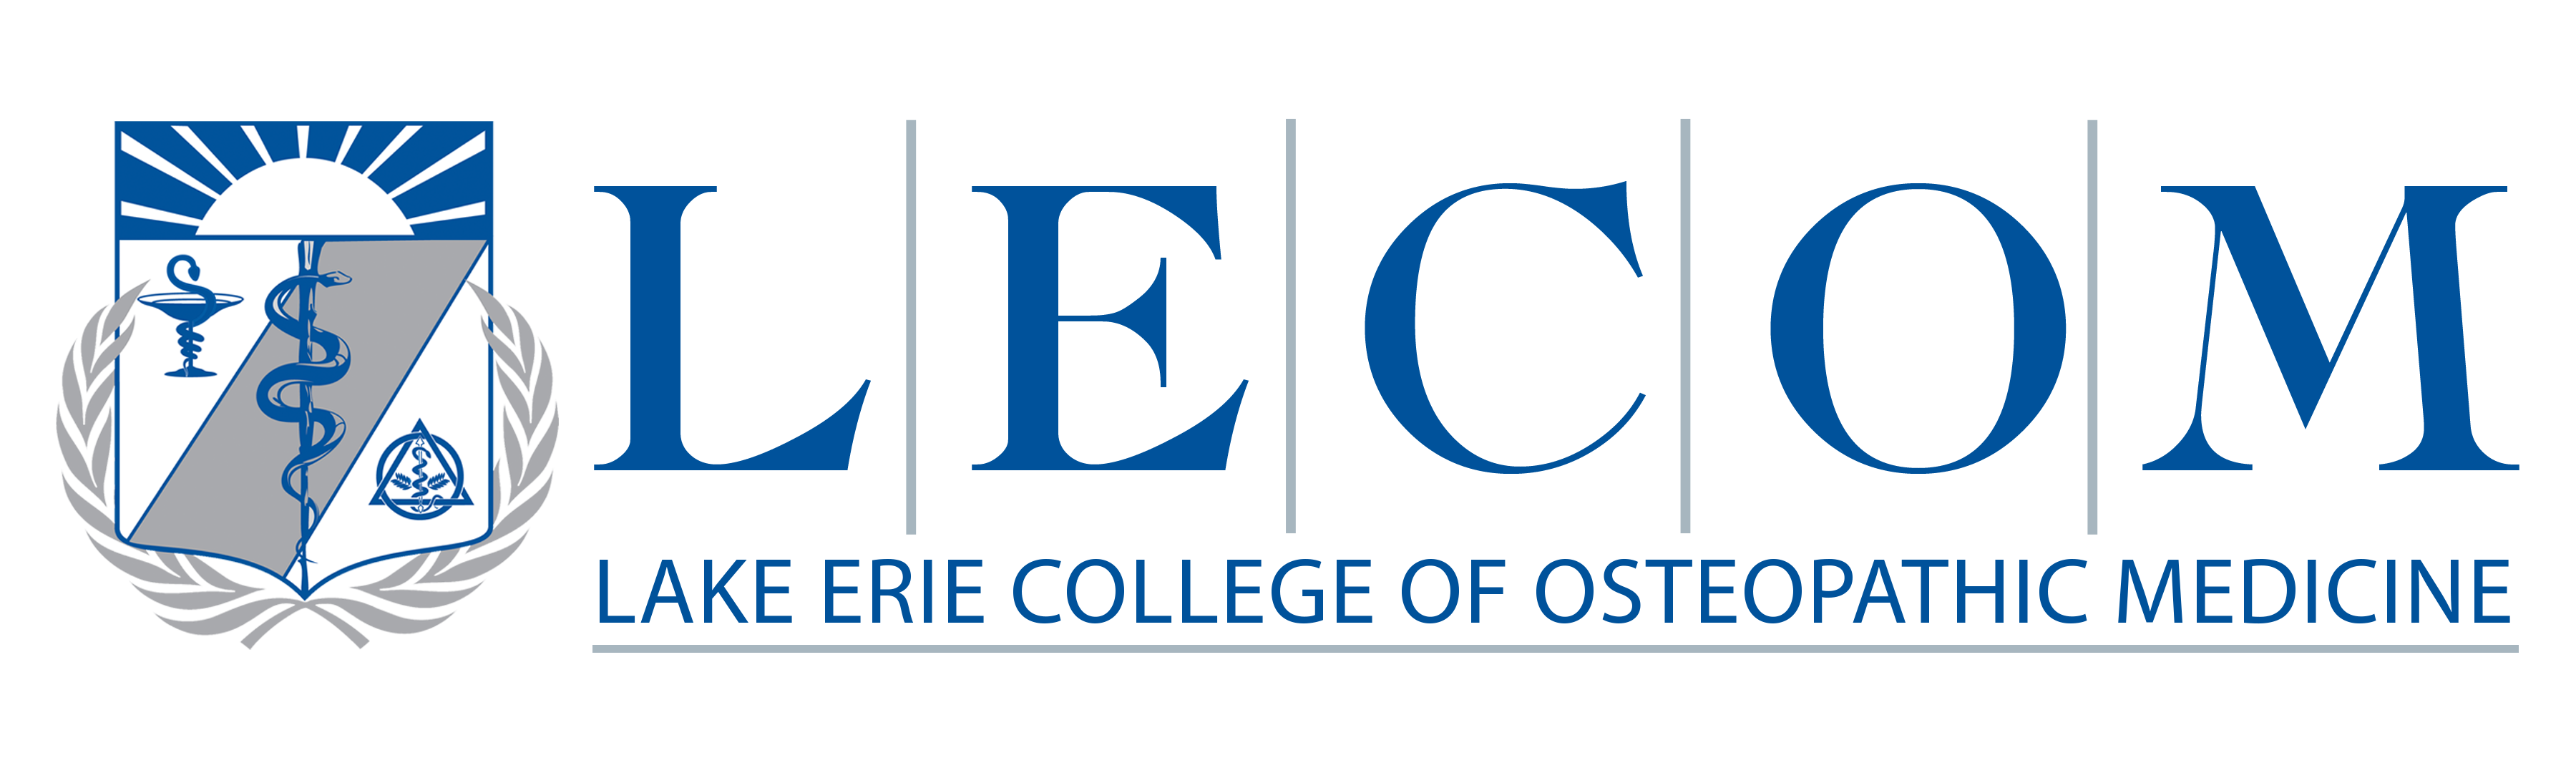 LECOM – Lake Erie College of Osteopathic Medicine